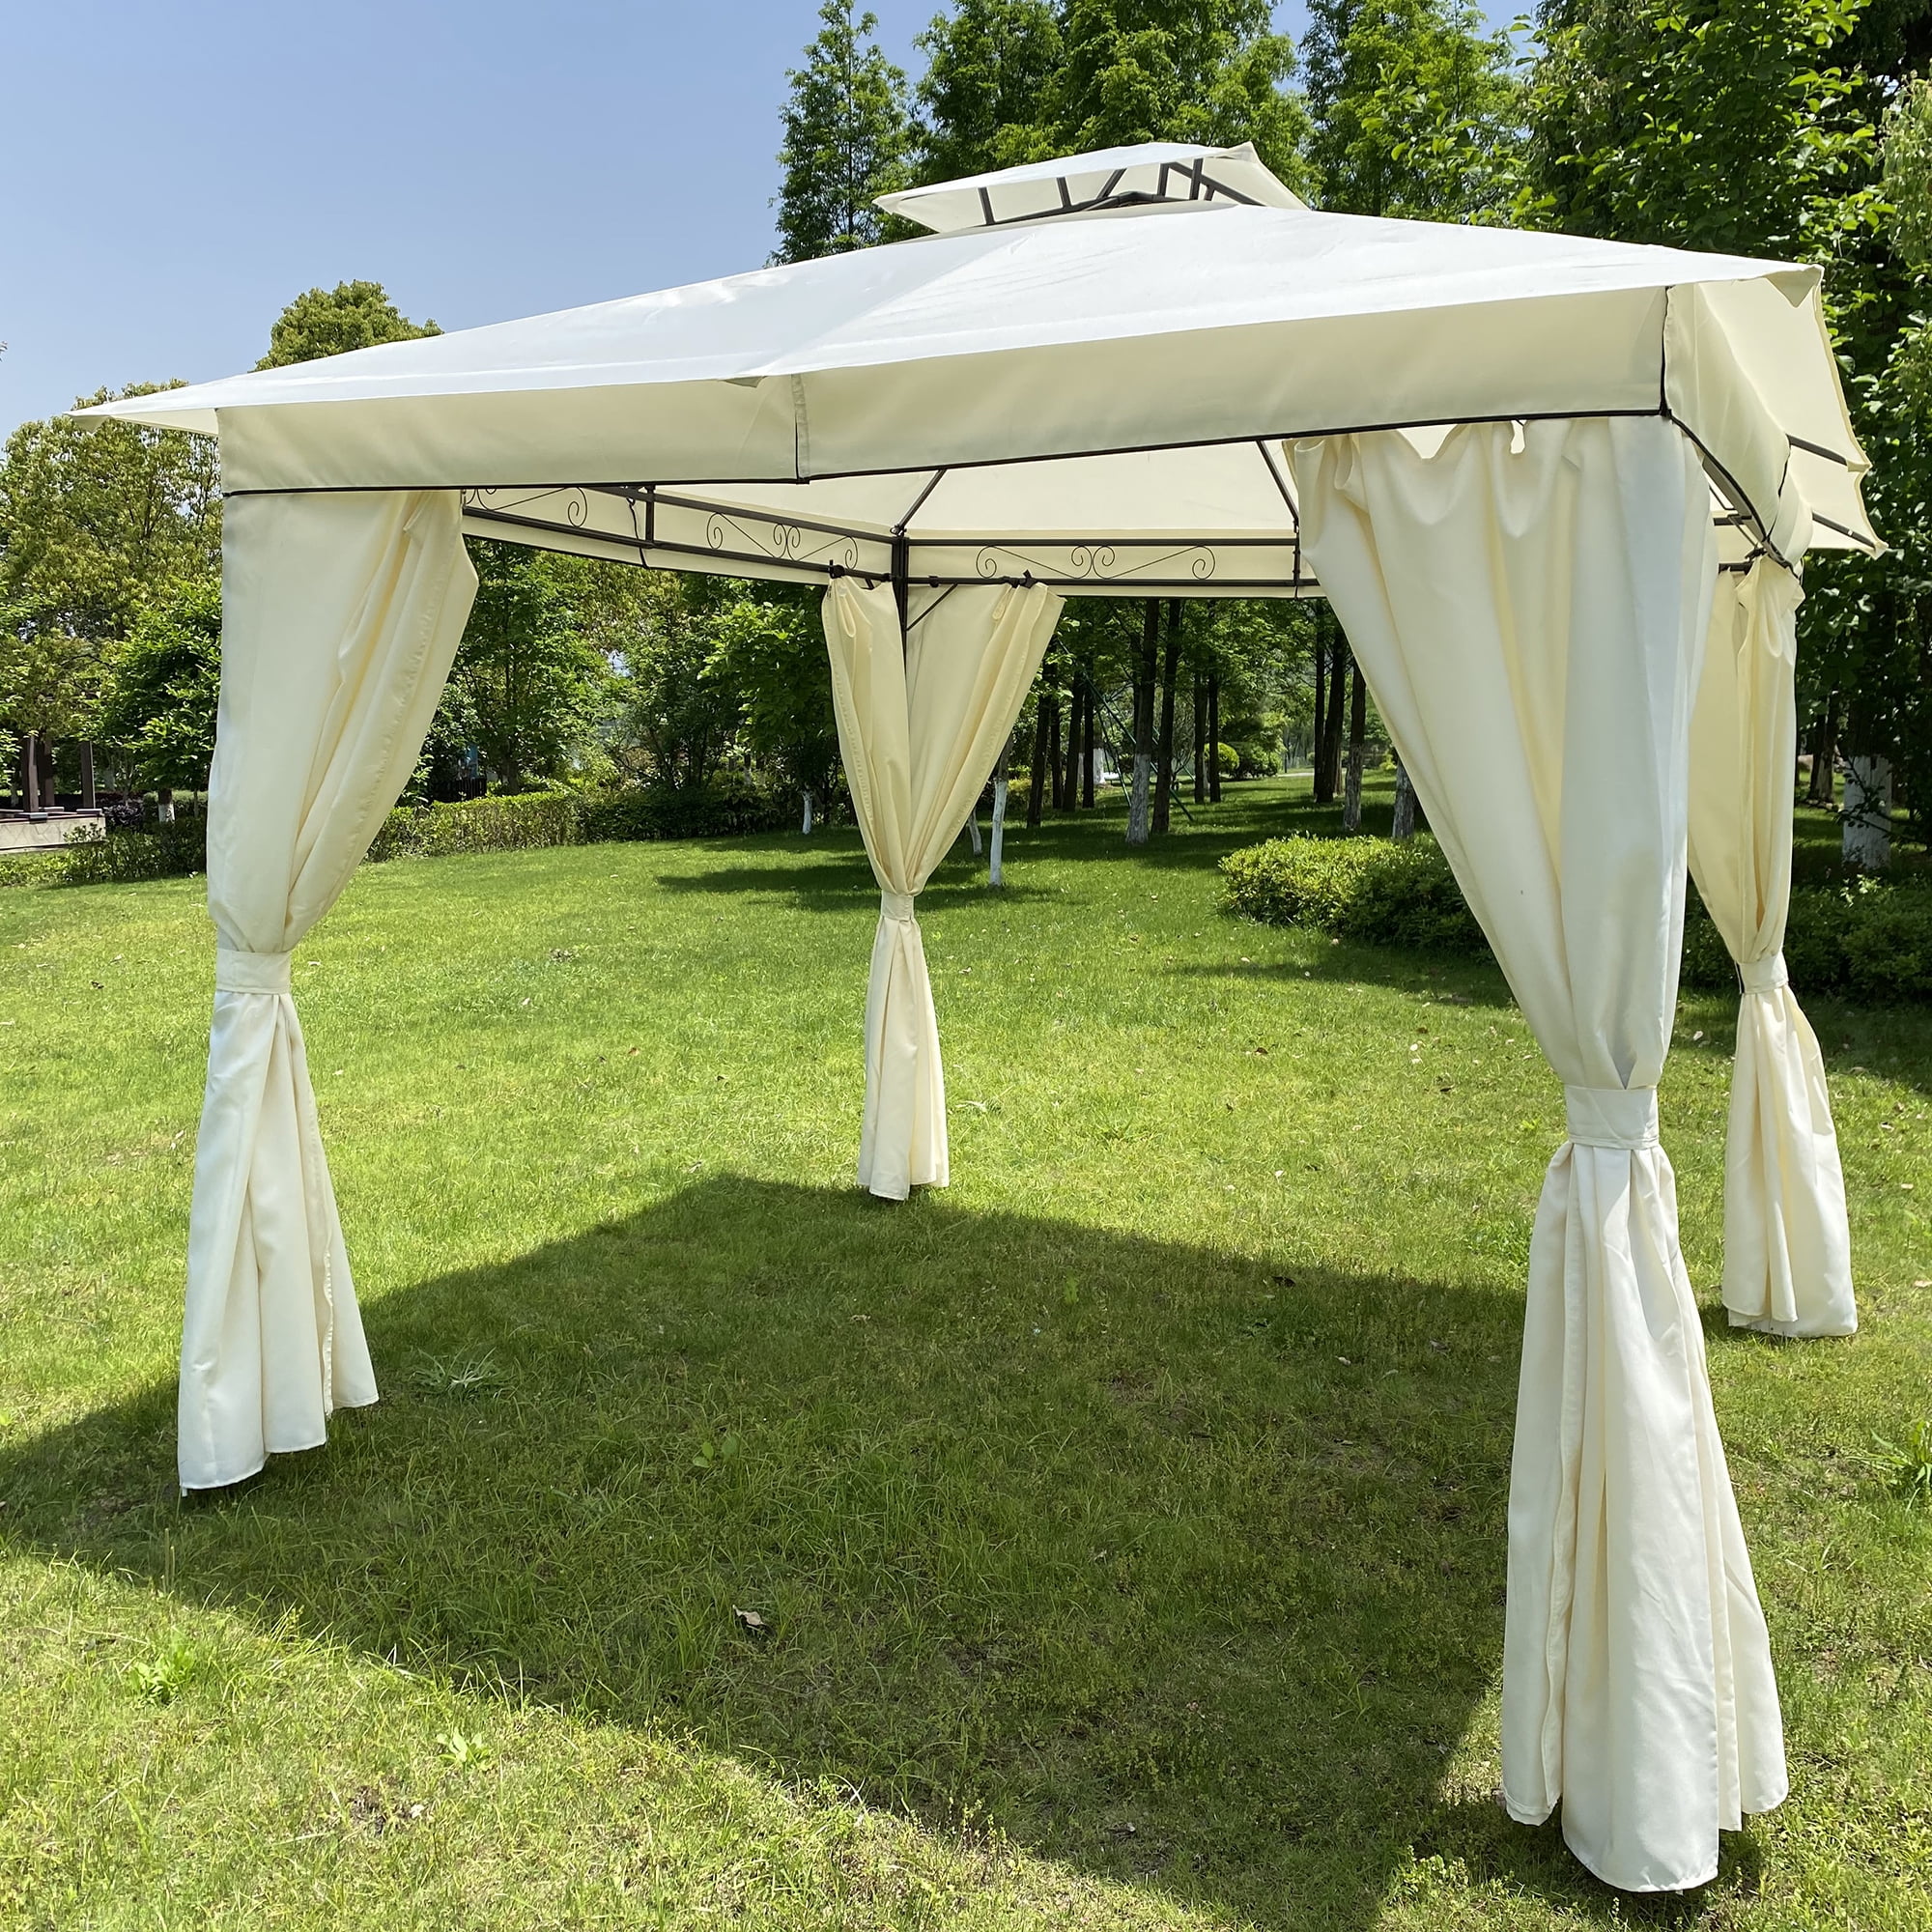 Outsunny 10x10ft Garden Gazebo Double Top Outdoor Canopy Patio Event Party Tent Backyard Sun Shade with Mesh Curtain Beige